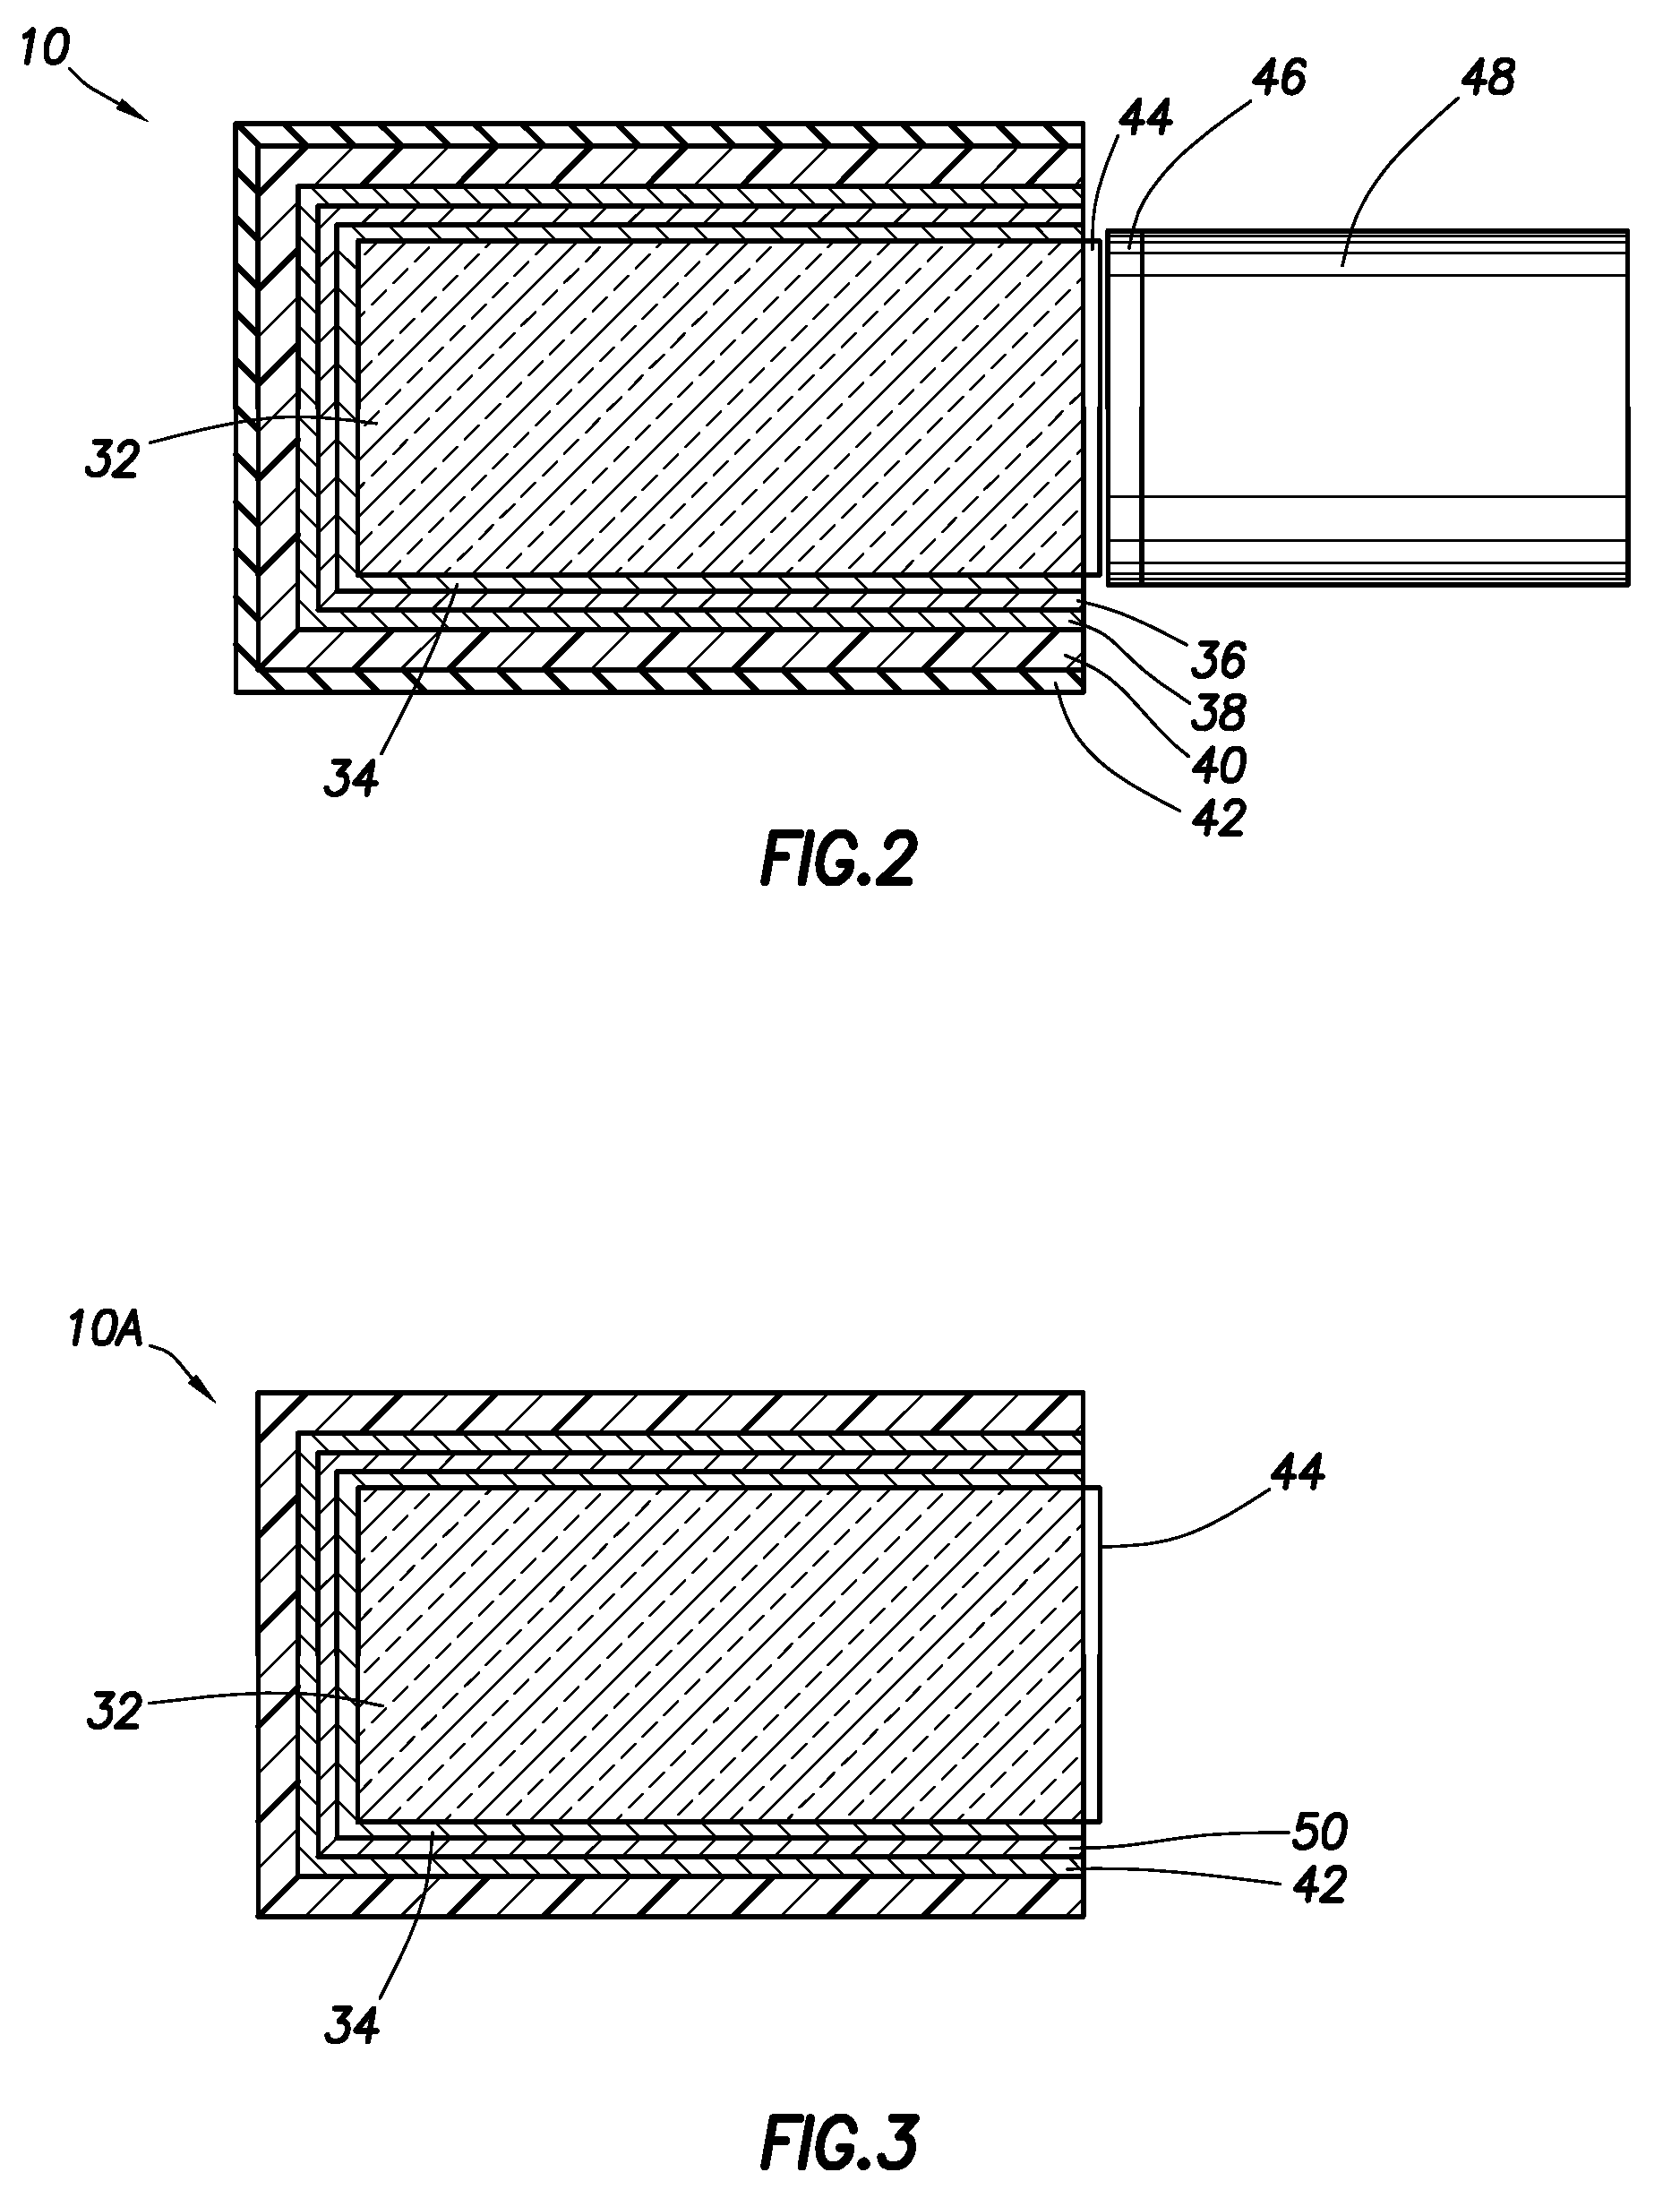 Hermetically sealed packaging and neutron shielding for scintillation-type radiation detectors